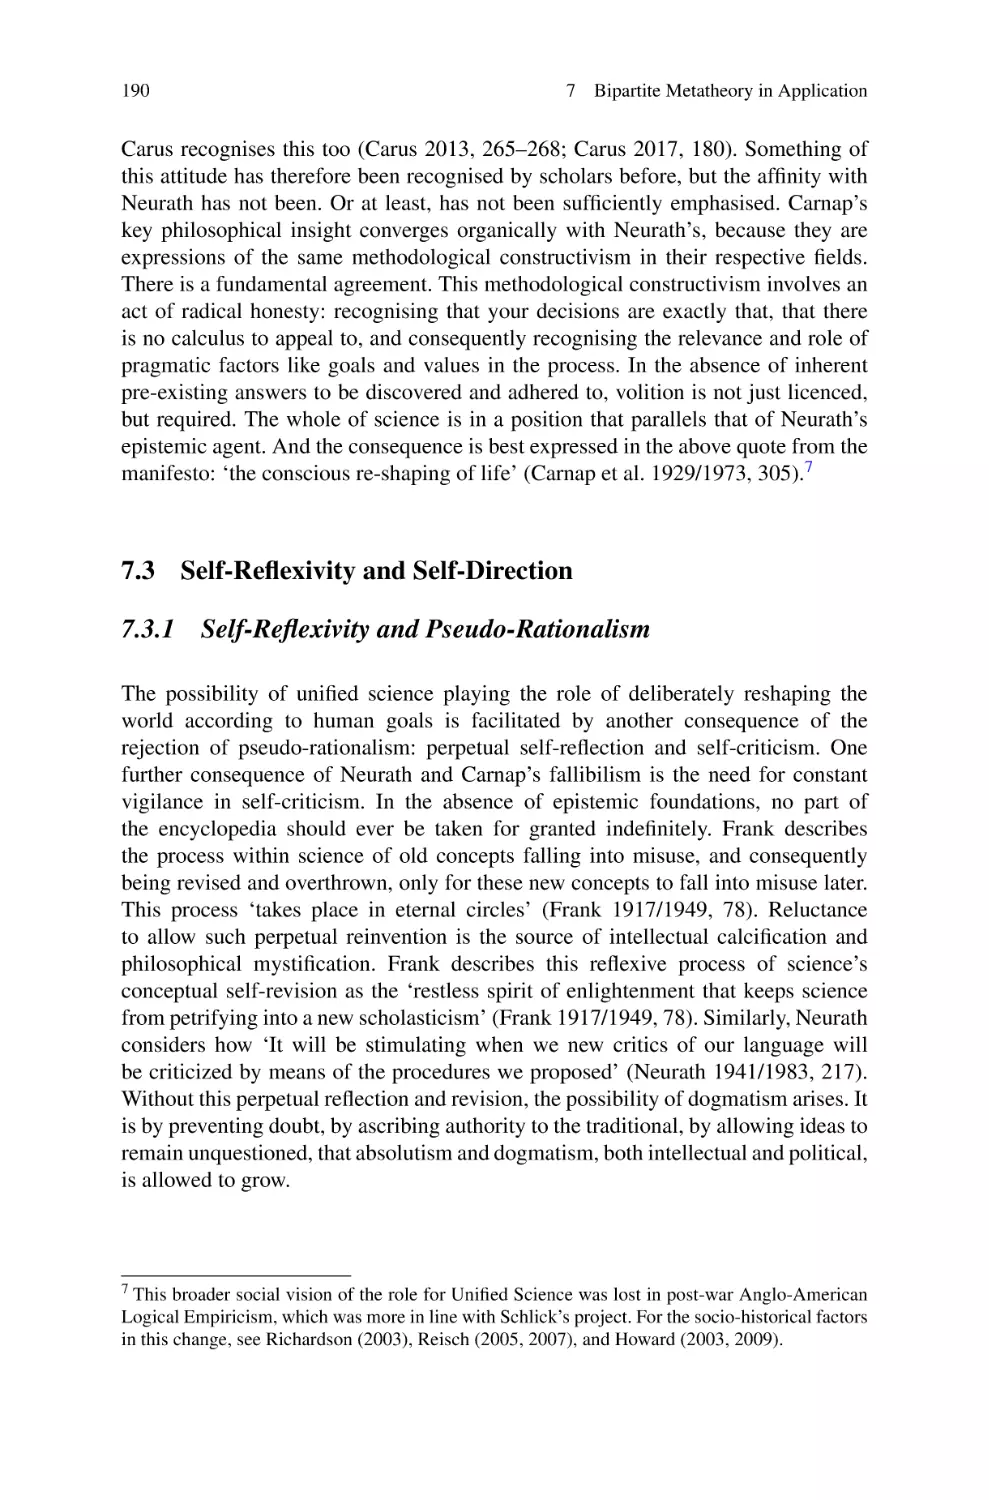 7.3 Self-Reflexivity and Self-Direction
7.3.1 Self-Reflexivity and Pseudo-Rationalism